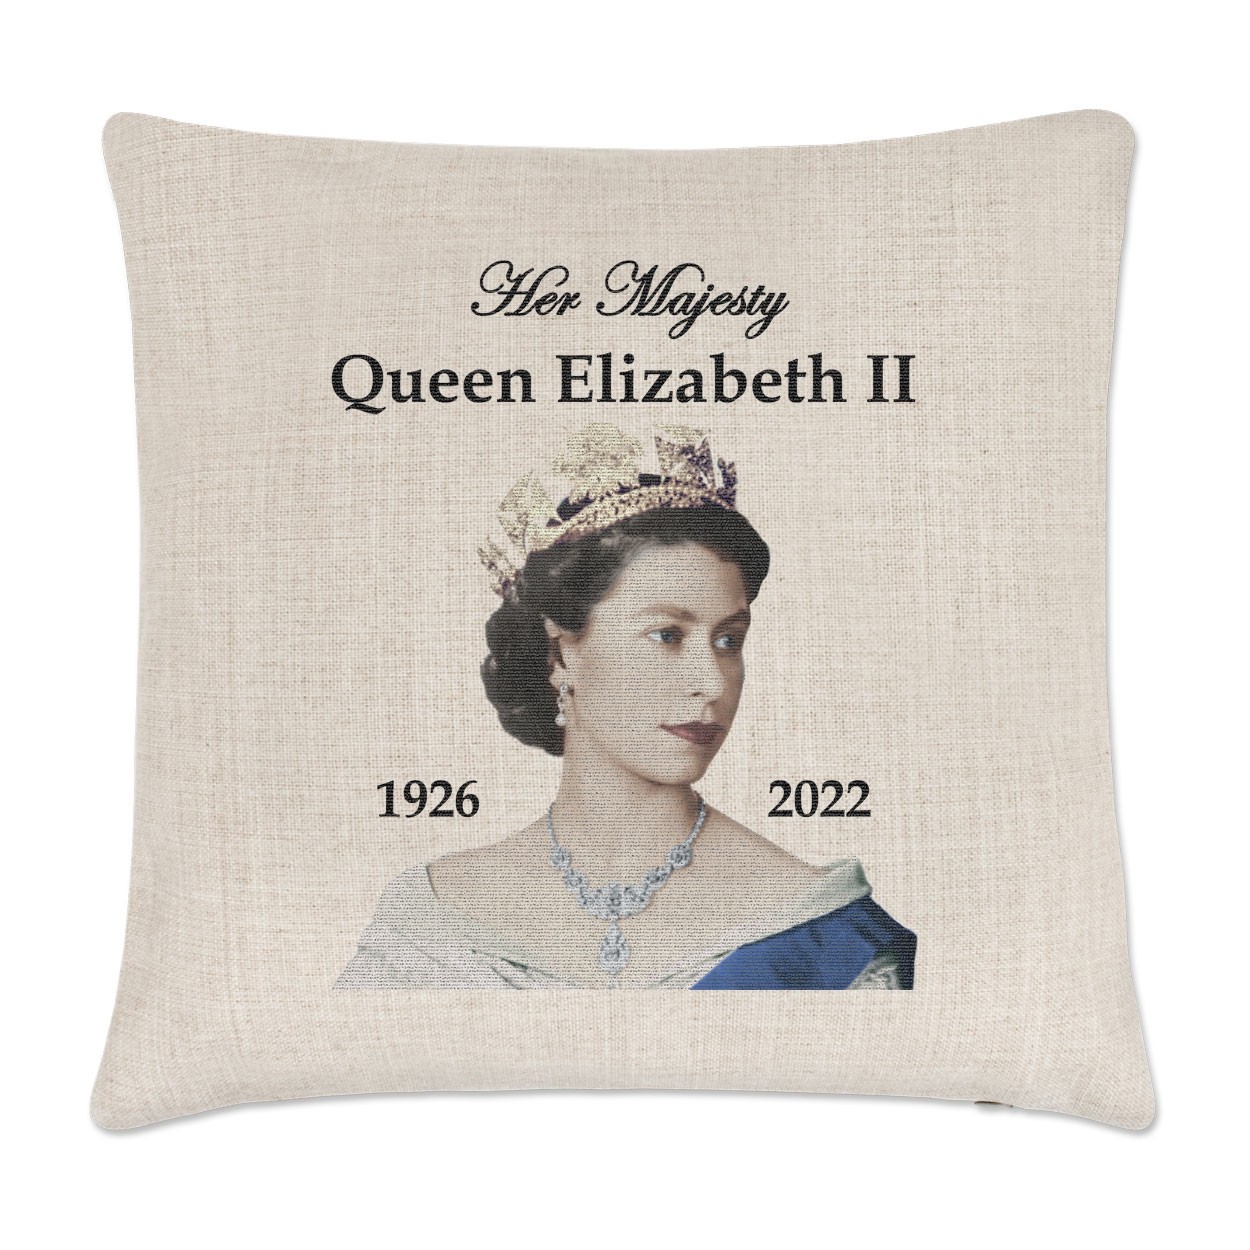 Her Majesty Queen Elizabeth II 1926 - 2022 Cushion Cover Commemorative Gift